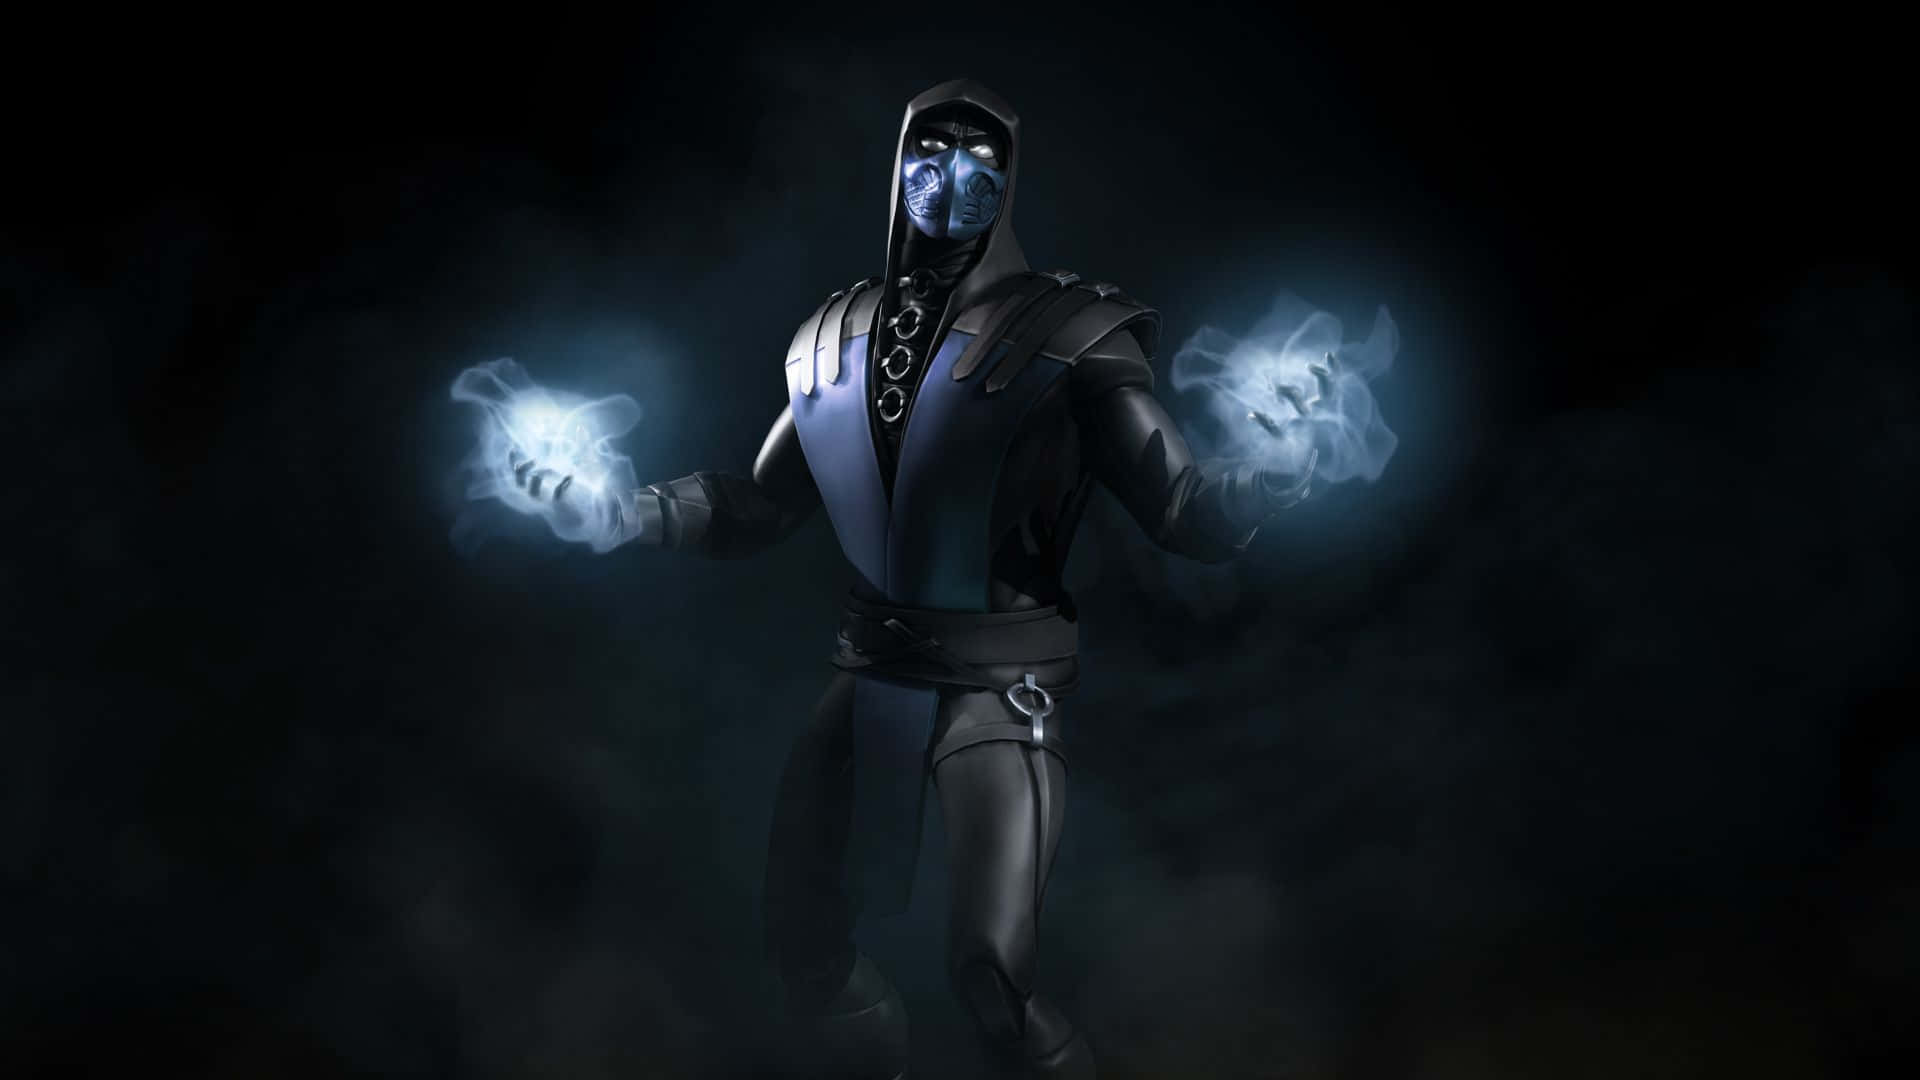 Enjoy the ultimate battle in the intense and thrilling fighting game, Mortal Kombat!